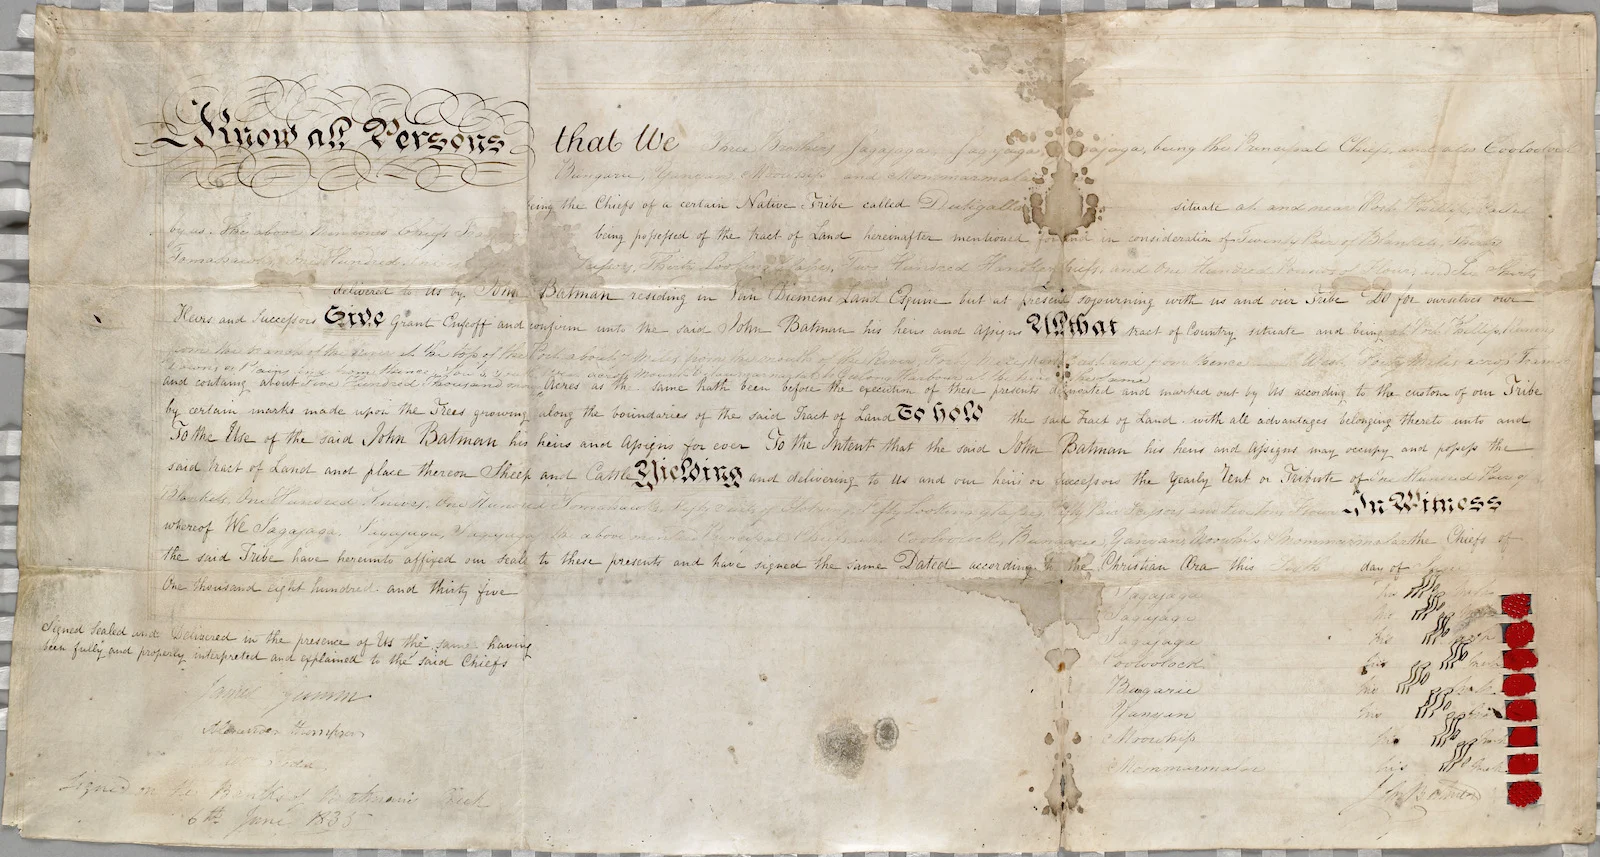 The "Melbourne" deed John Batman is said to have presented to the Kulin nations' leaders and to have it signed by them on 6 June 1835. This was intended to be evidence for Batman to claim, on behalf of the Port Phillip Association, much of the land around Port Phillip Bay.